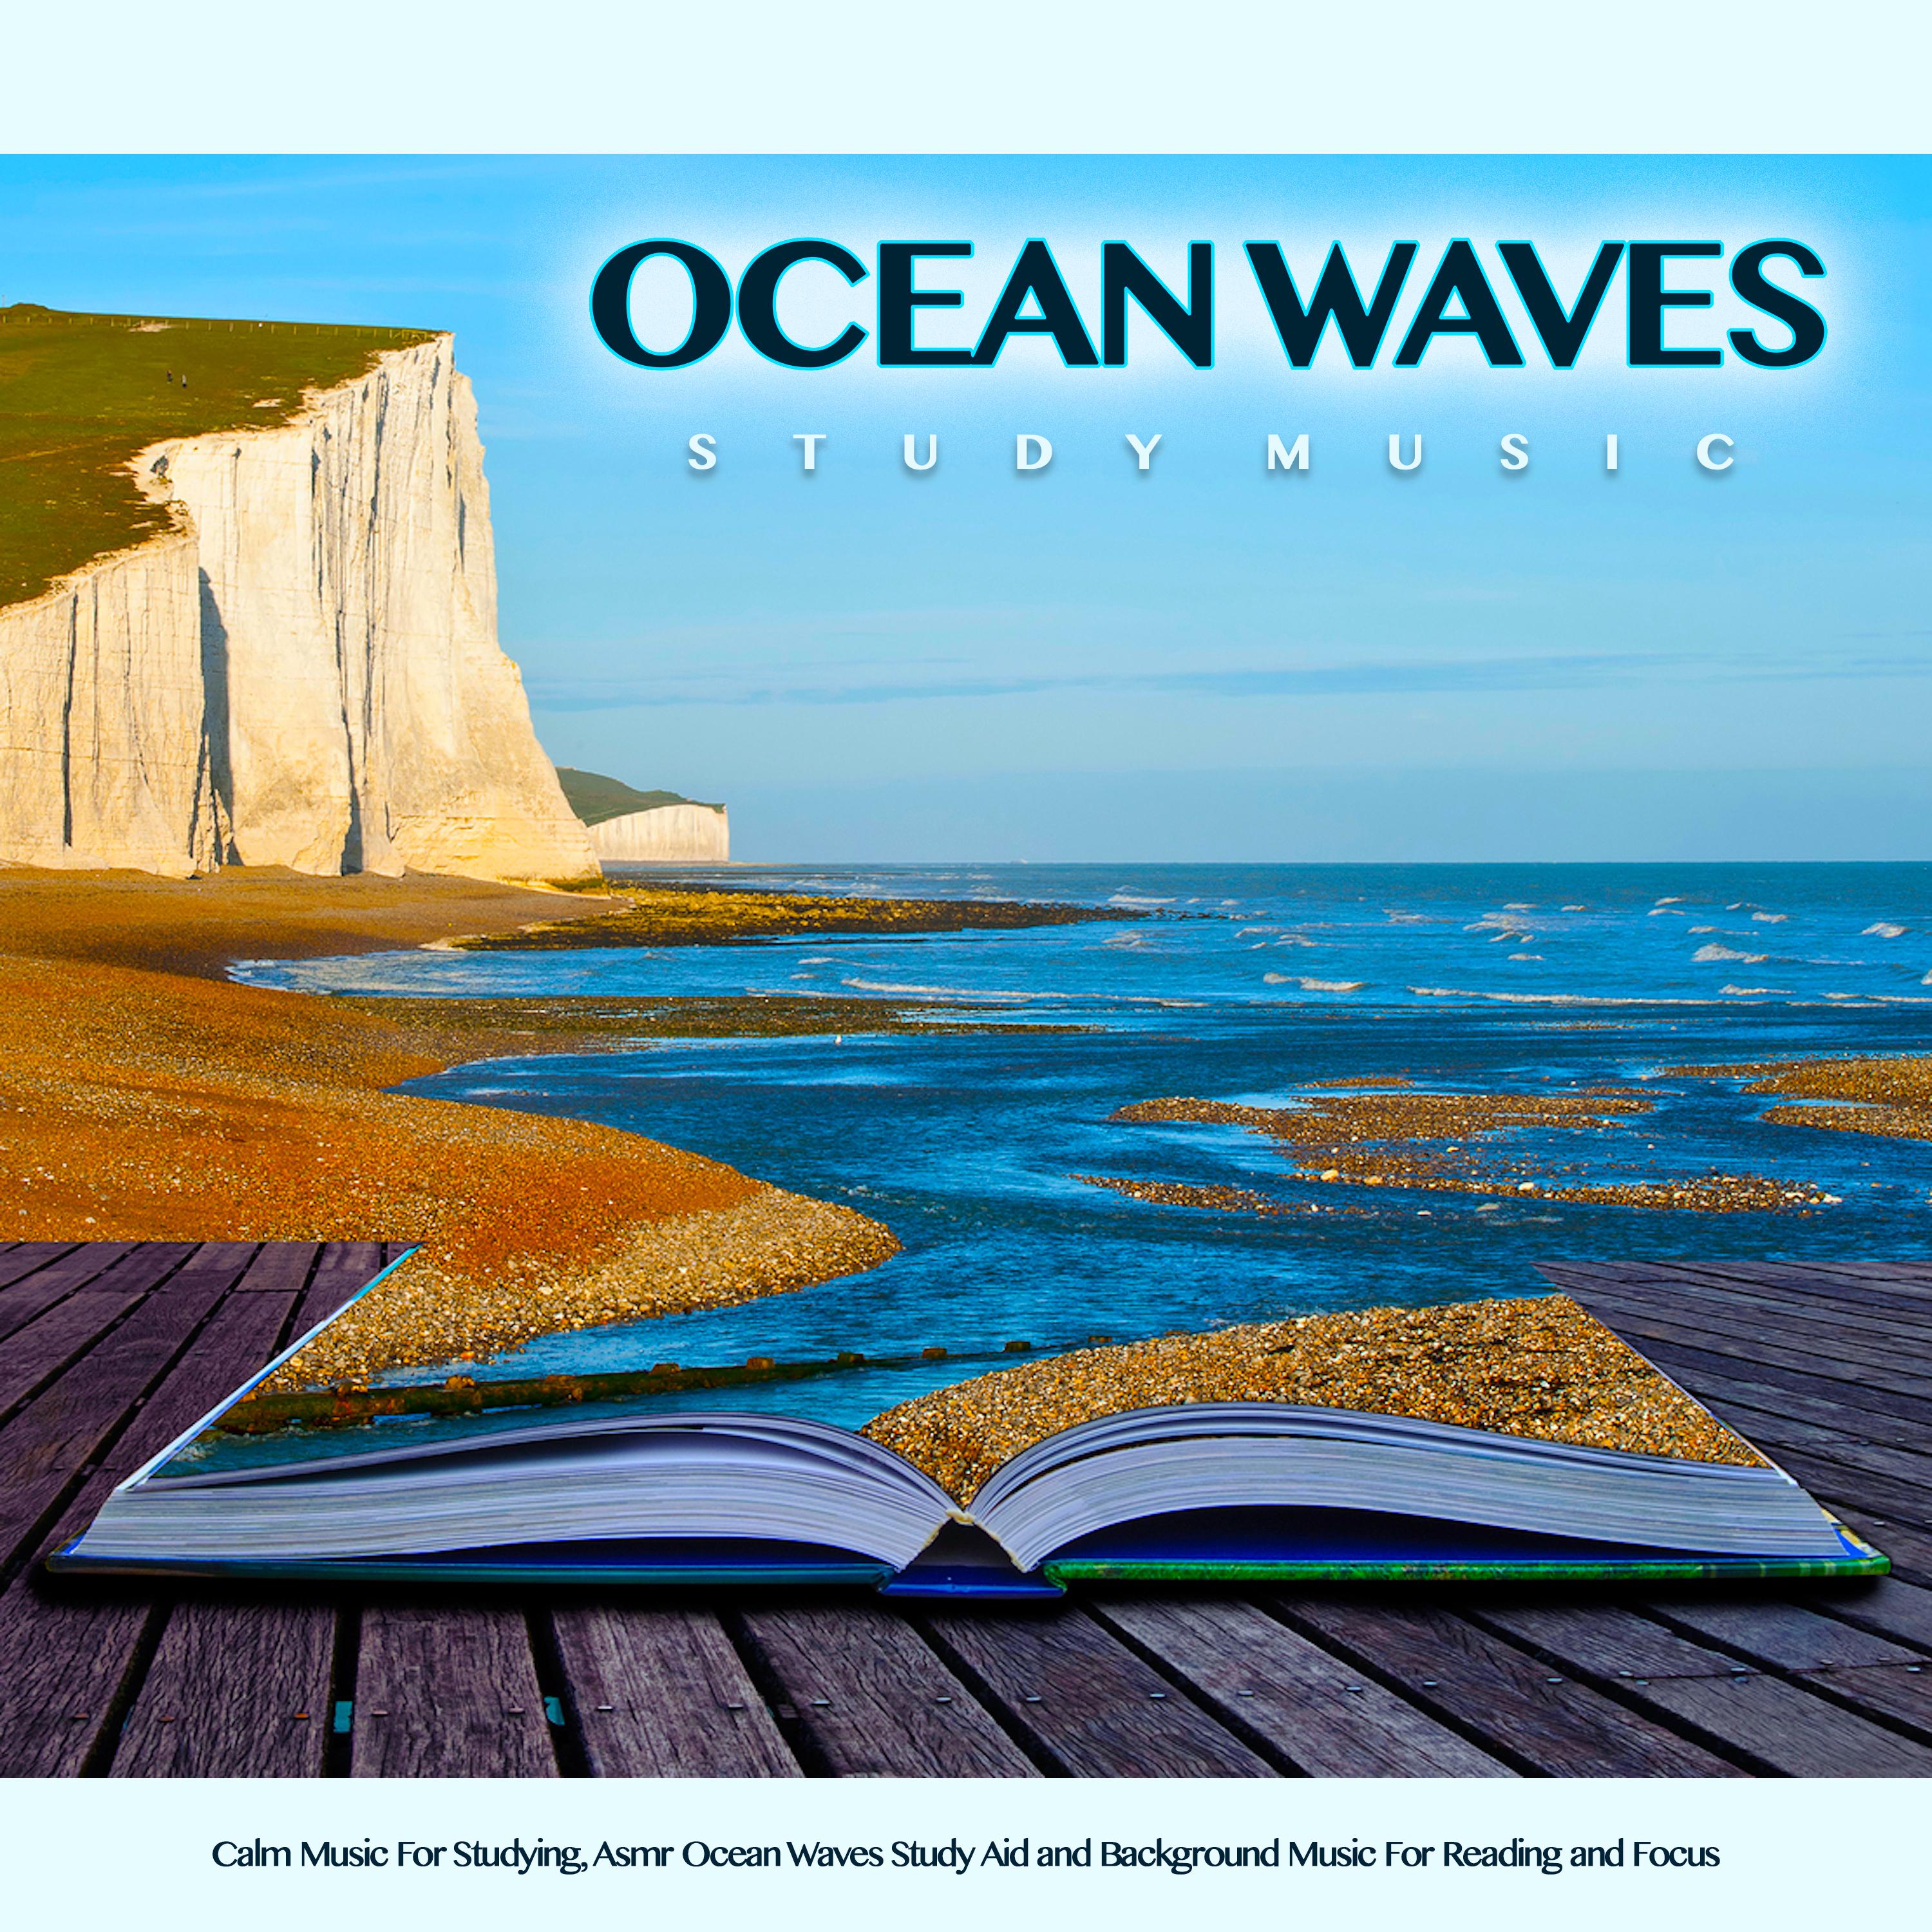 Ocean Waves Study Music: Calm Music For Studying, Asmr Ocean Waves Study Aid and Background Music For Reading and Focus